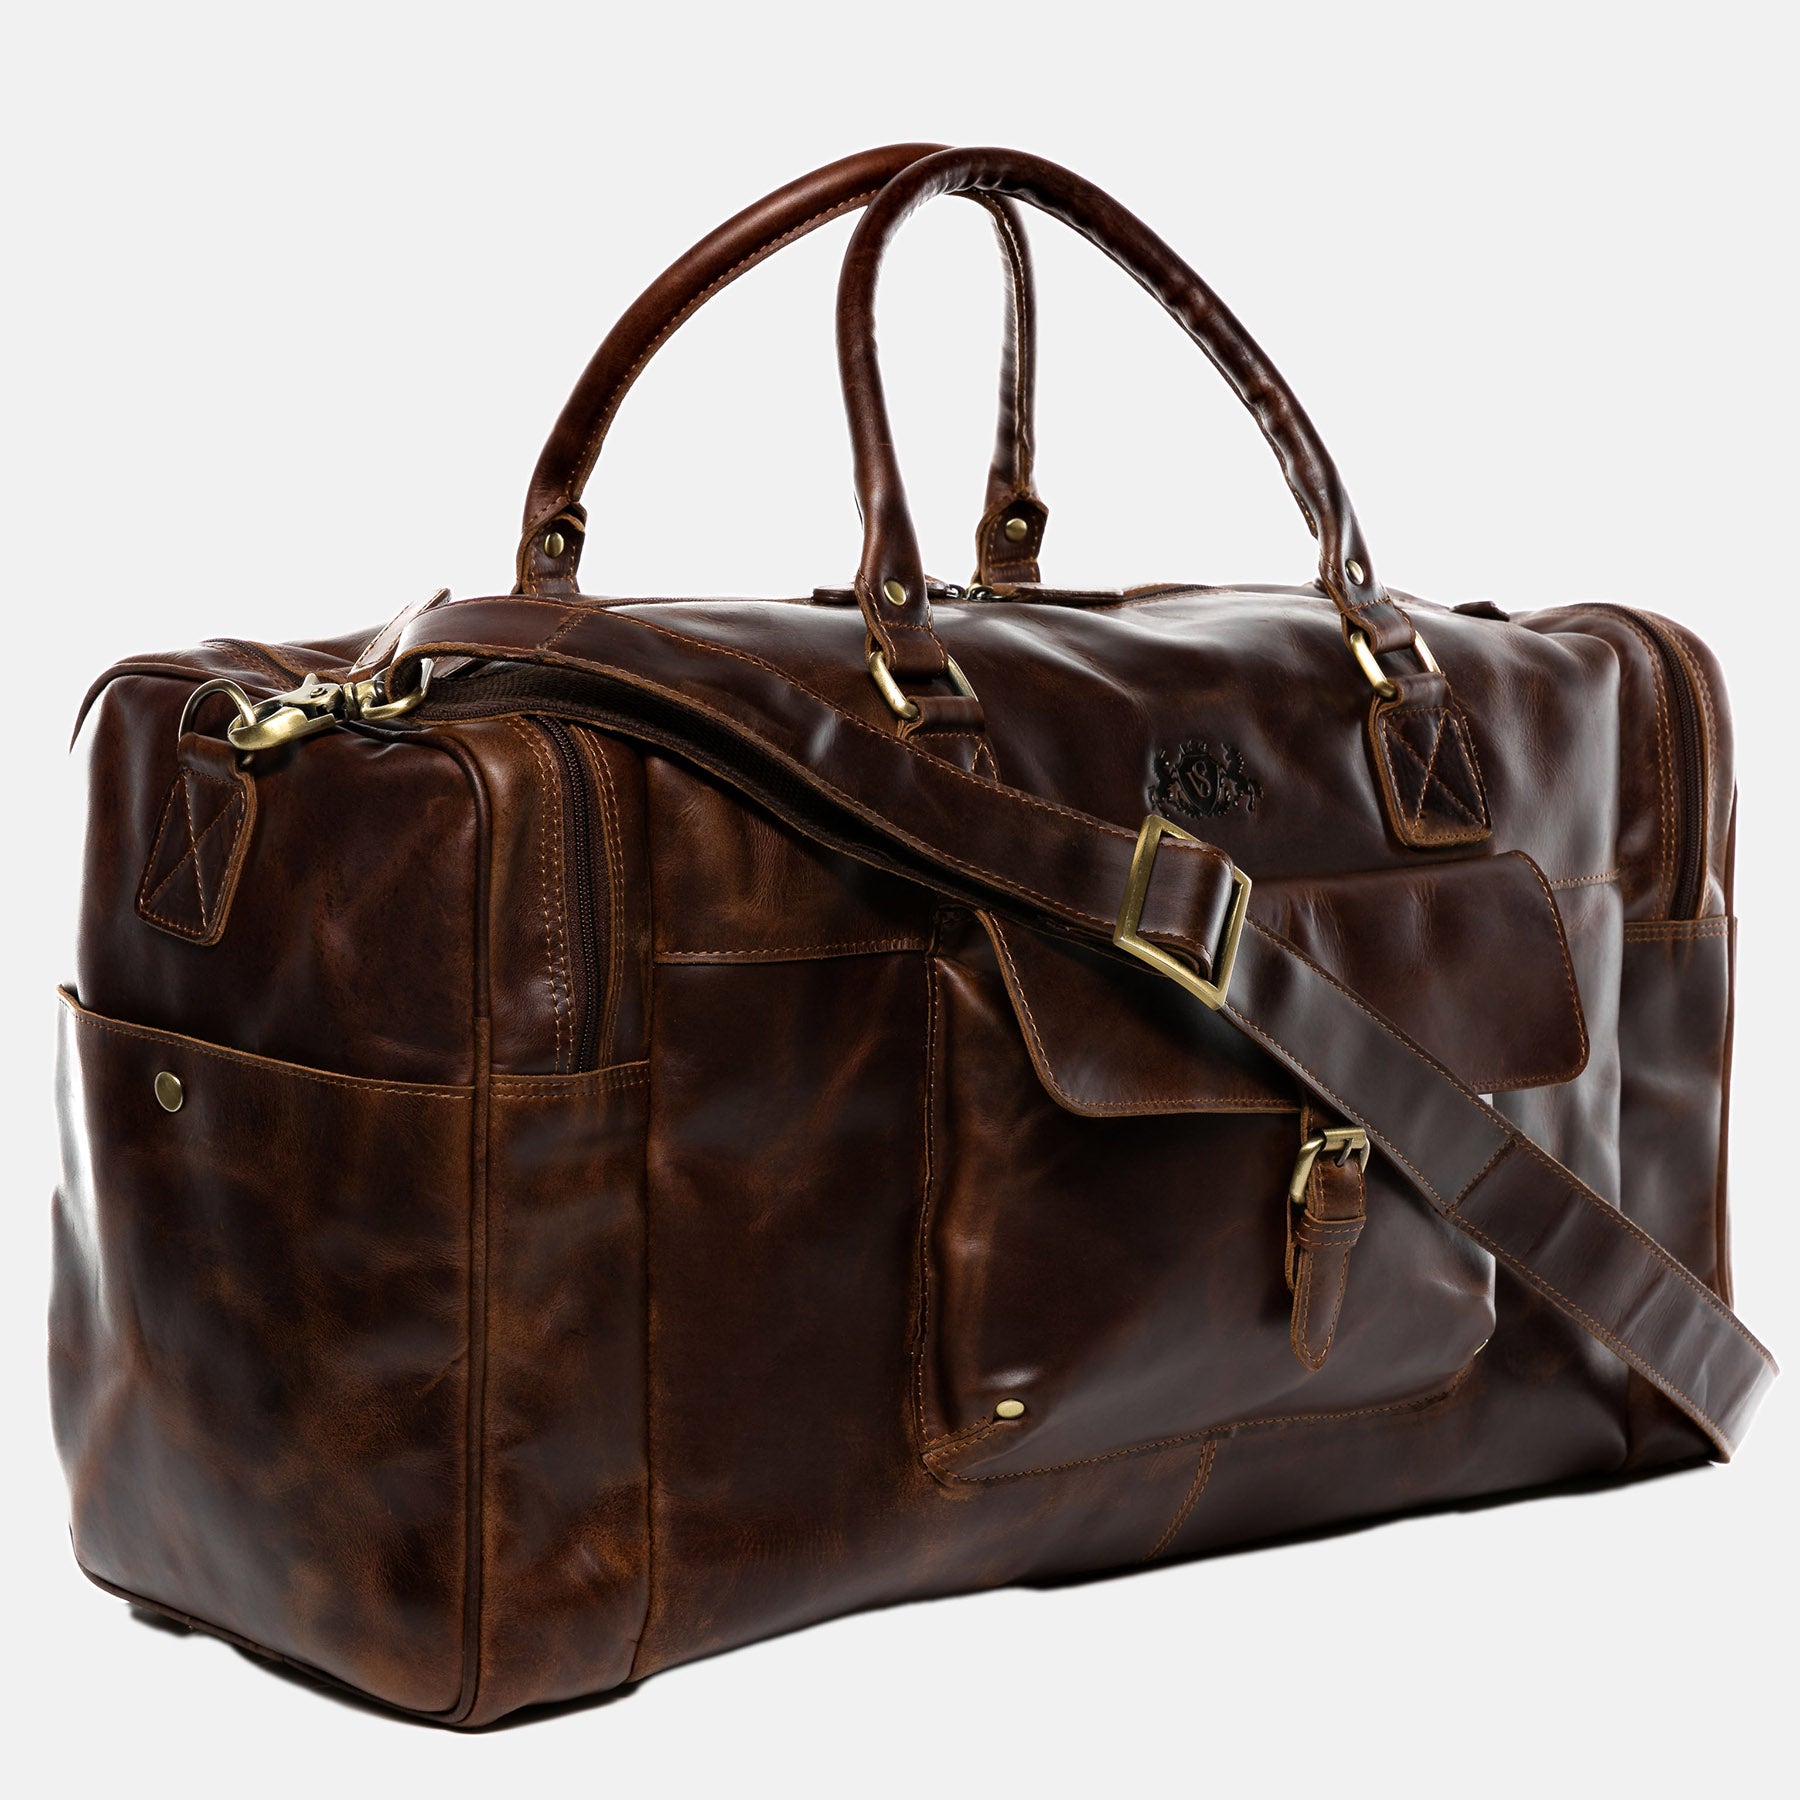 Travel bag with address tag YALE natural leather brown-cognac